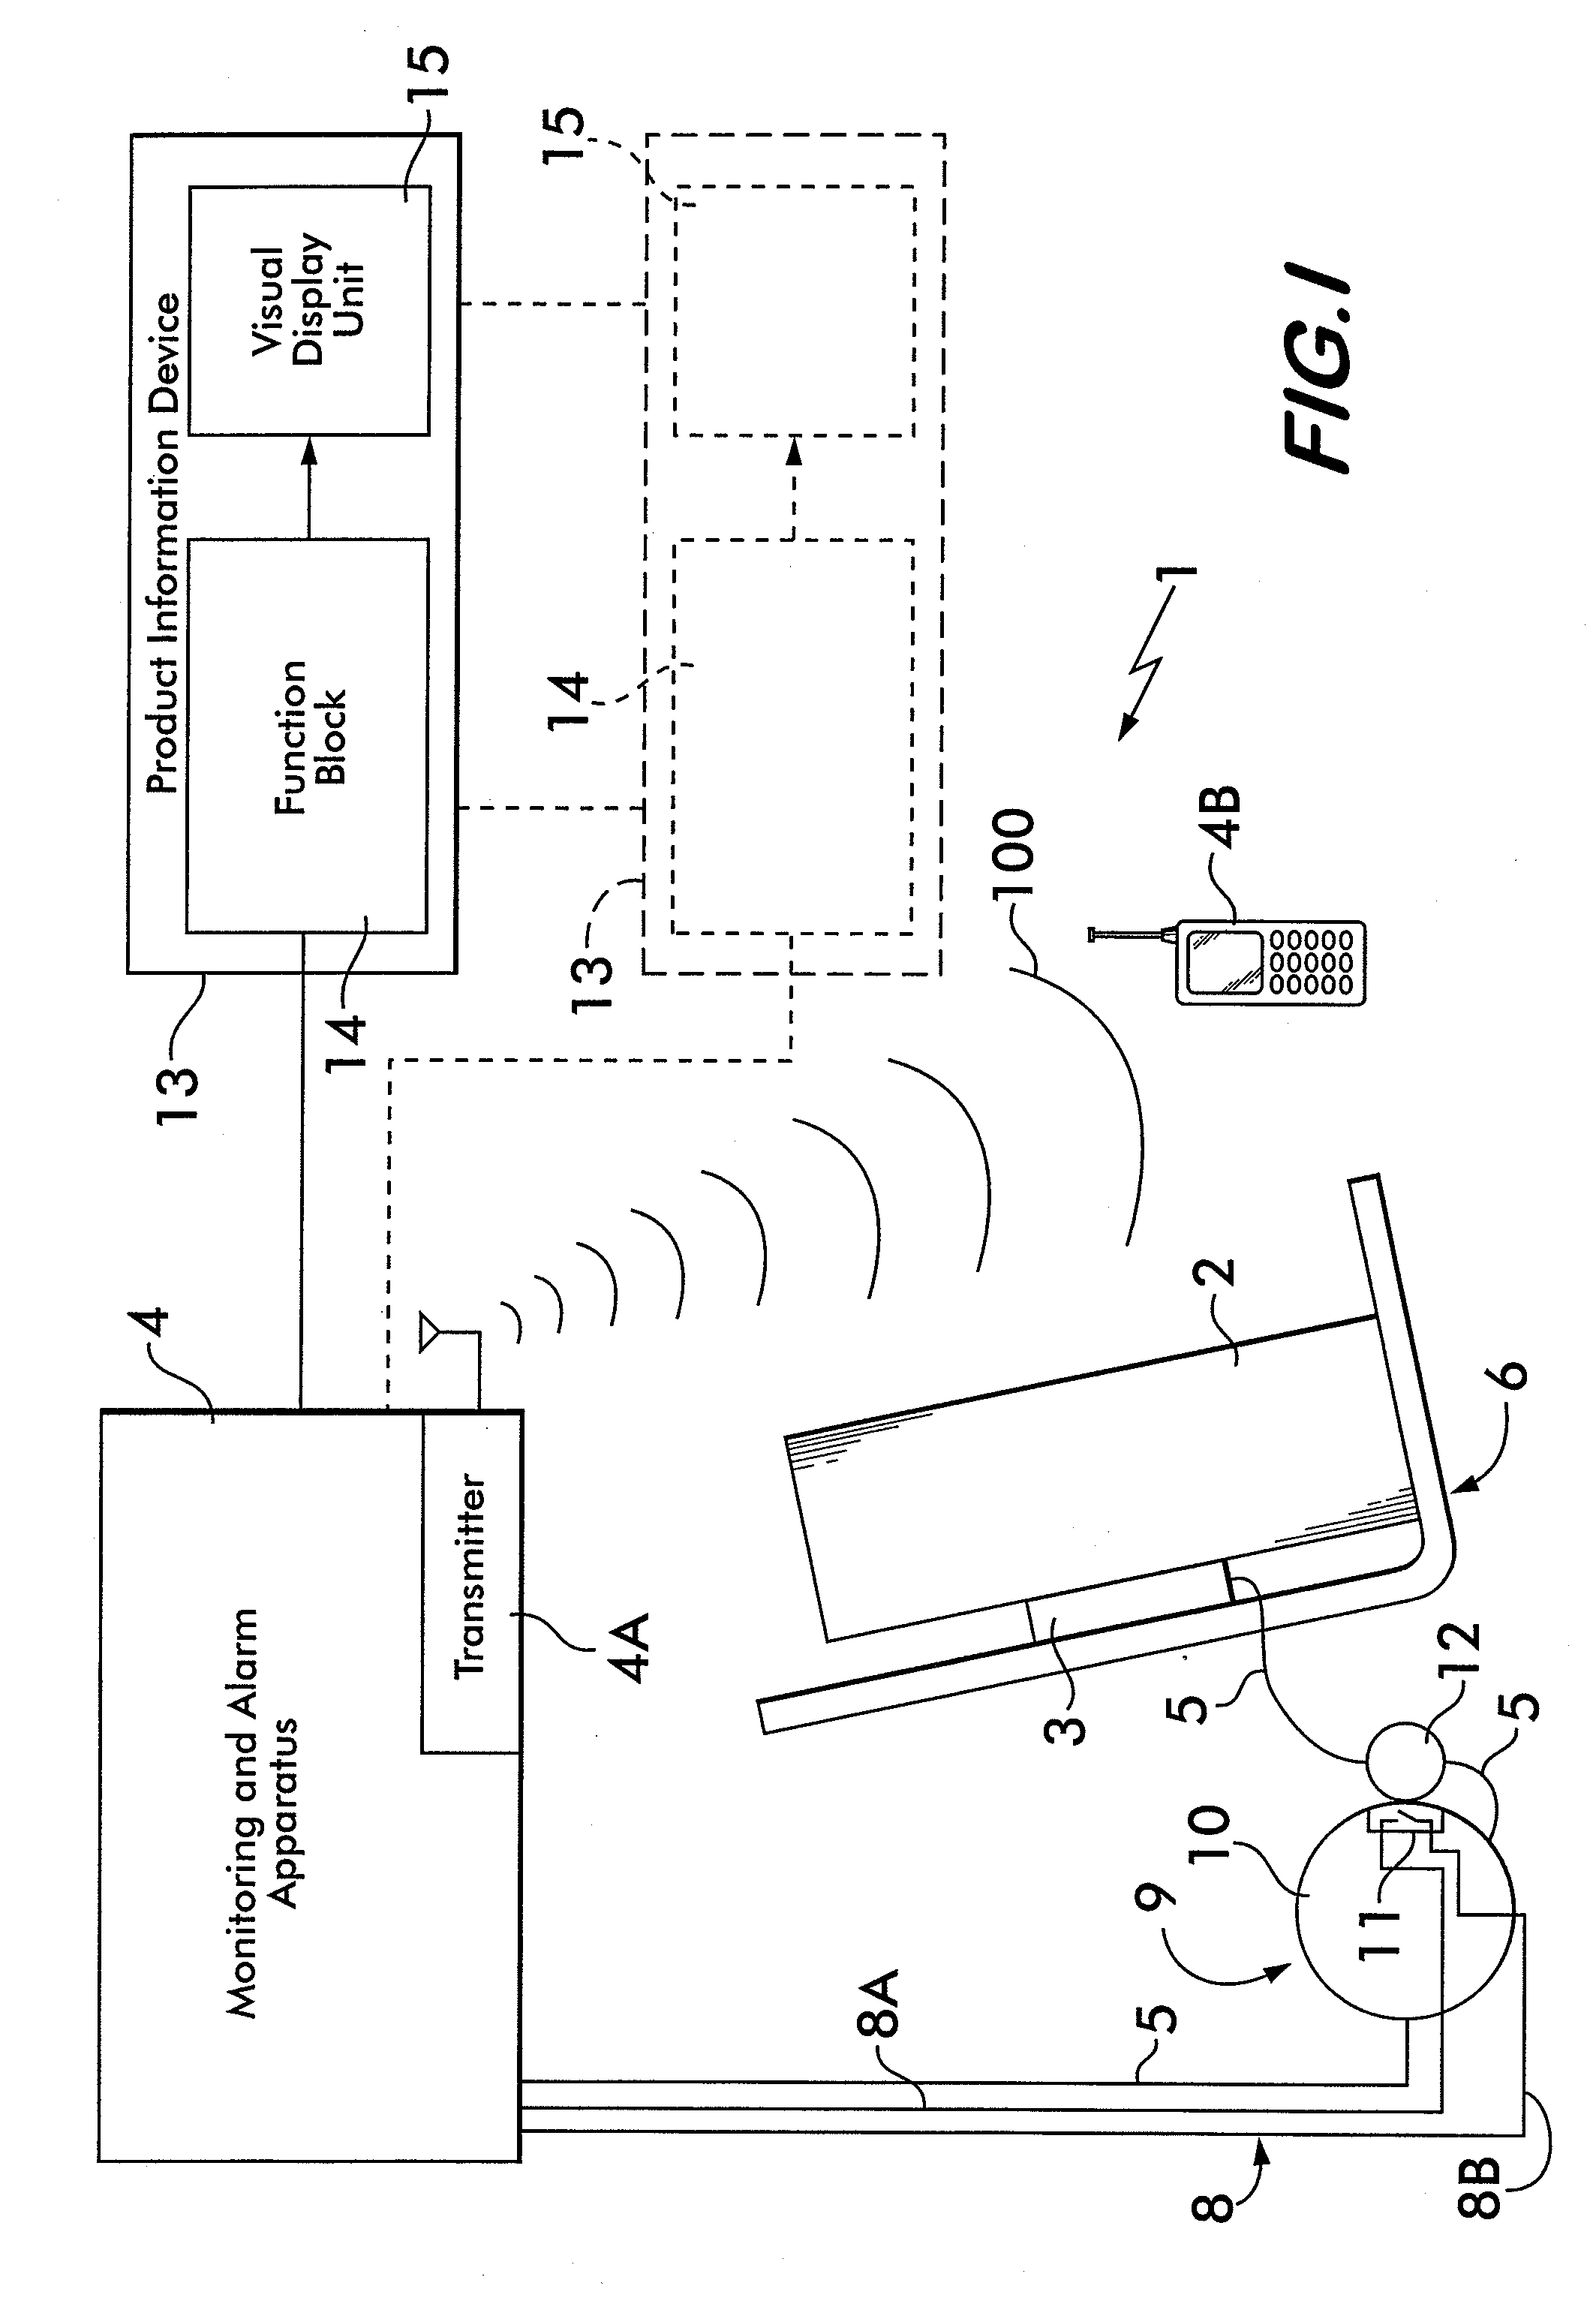 System and Method for Securing and Displaying Items for Merchandising